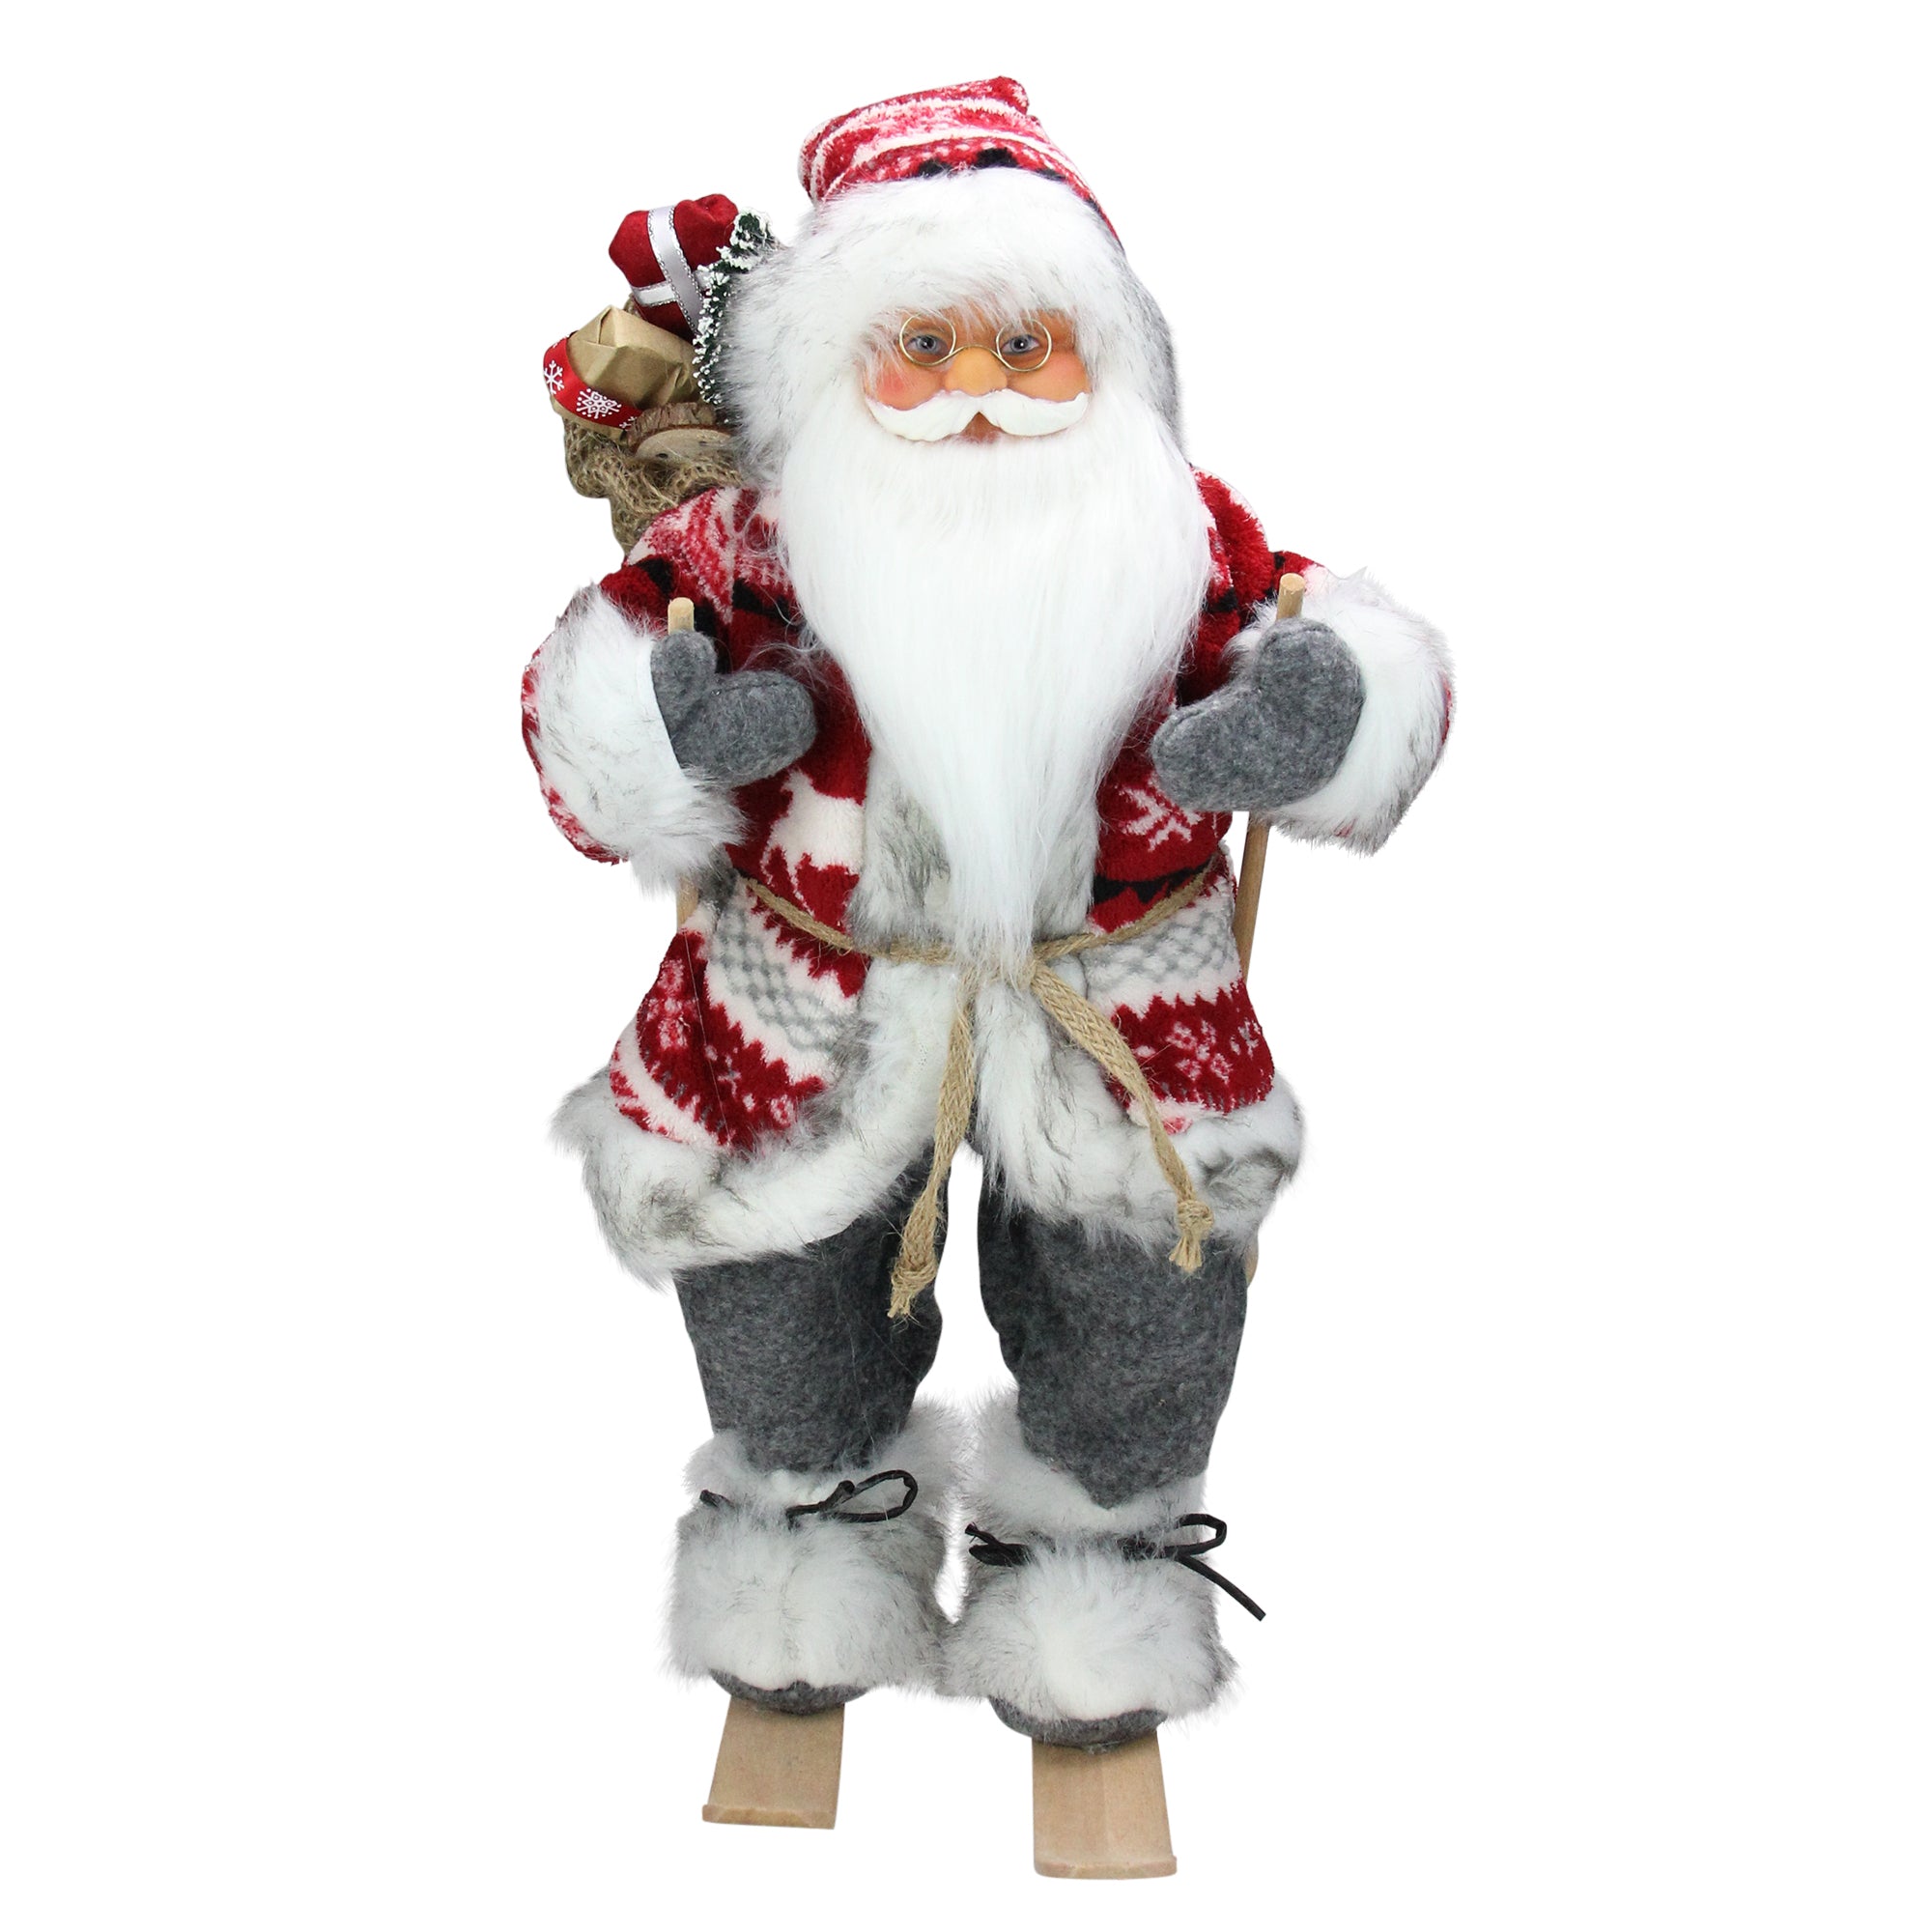 18" Alpine Chic Red and Gray Snowflake Skiing Santa with Gift Bag Decorative Christmas Figure